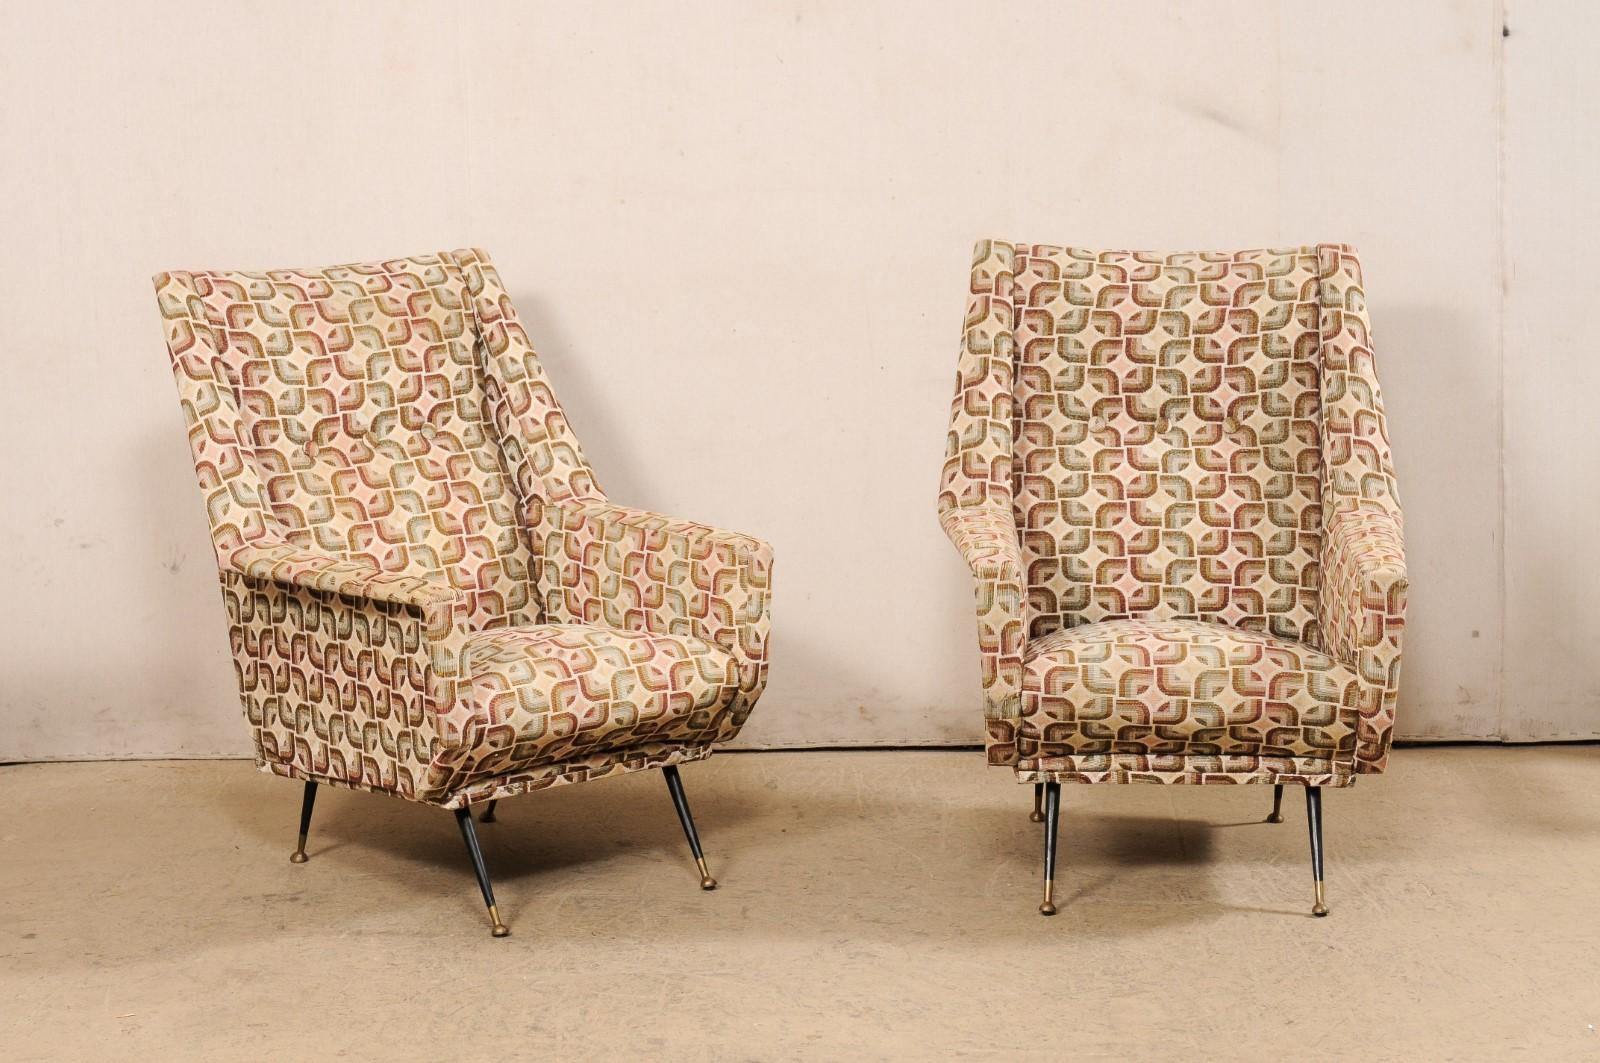 An Italian pair of upholstered wingback armchairs from the mid-20th century. These vintage chairs from Italy have been designed with midcentury styling with upholstered rectangular backs framed within outwardly folded arms that are angular and